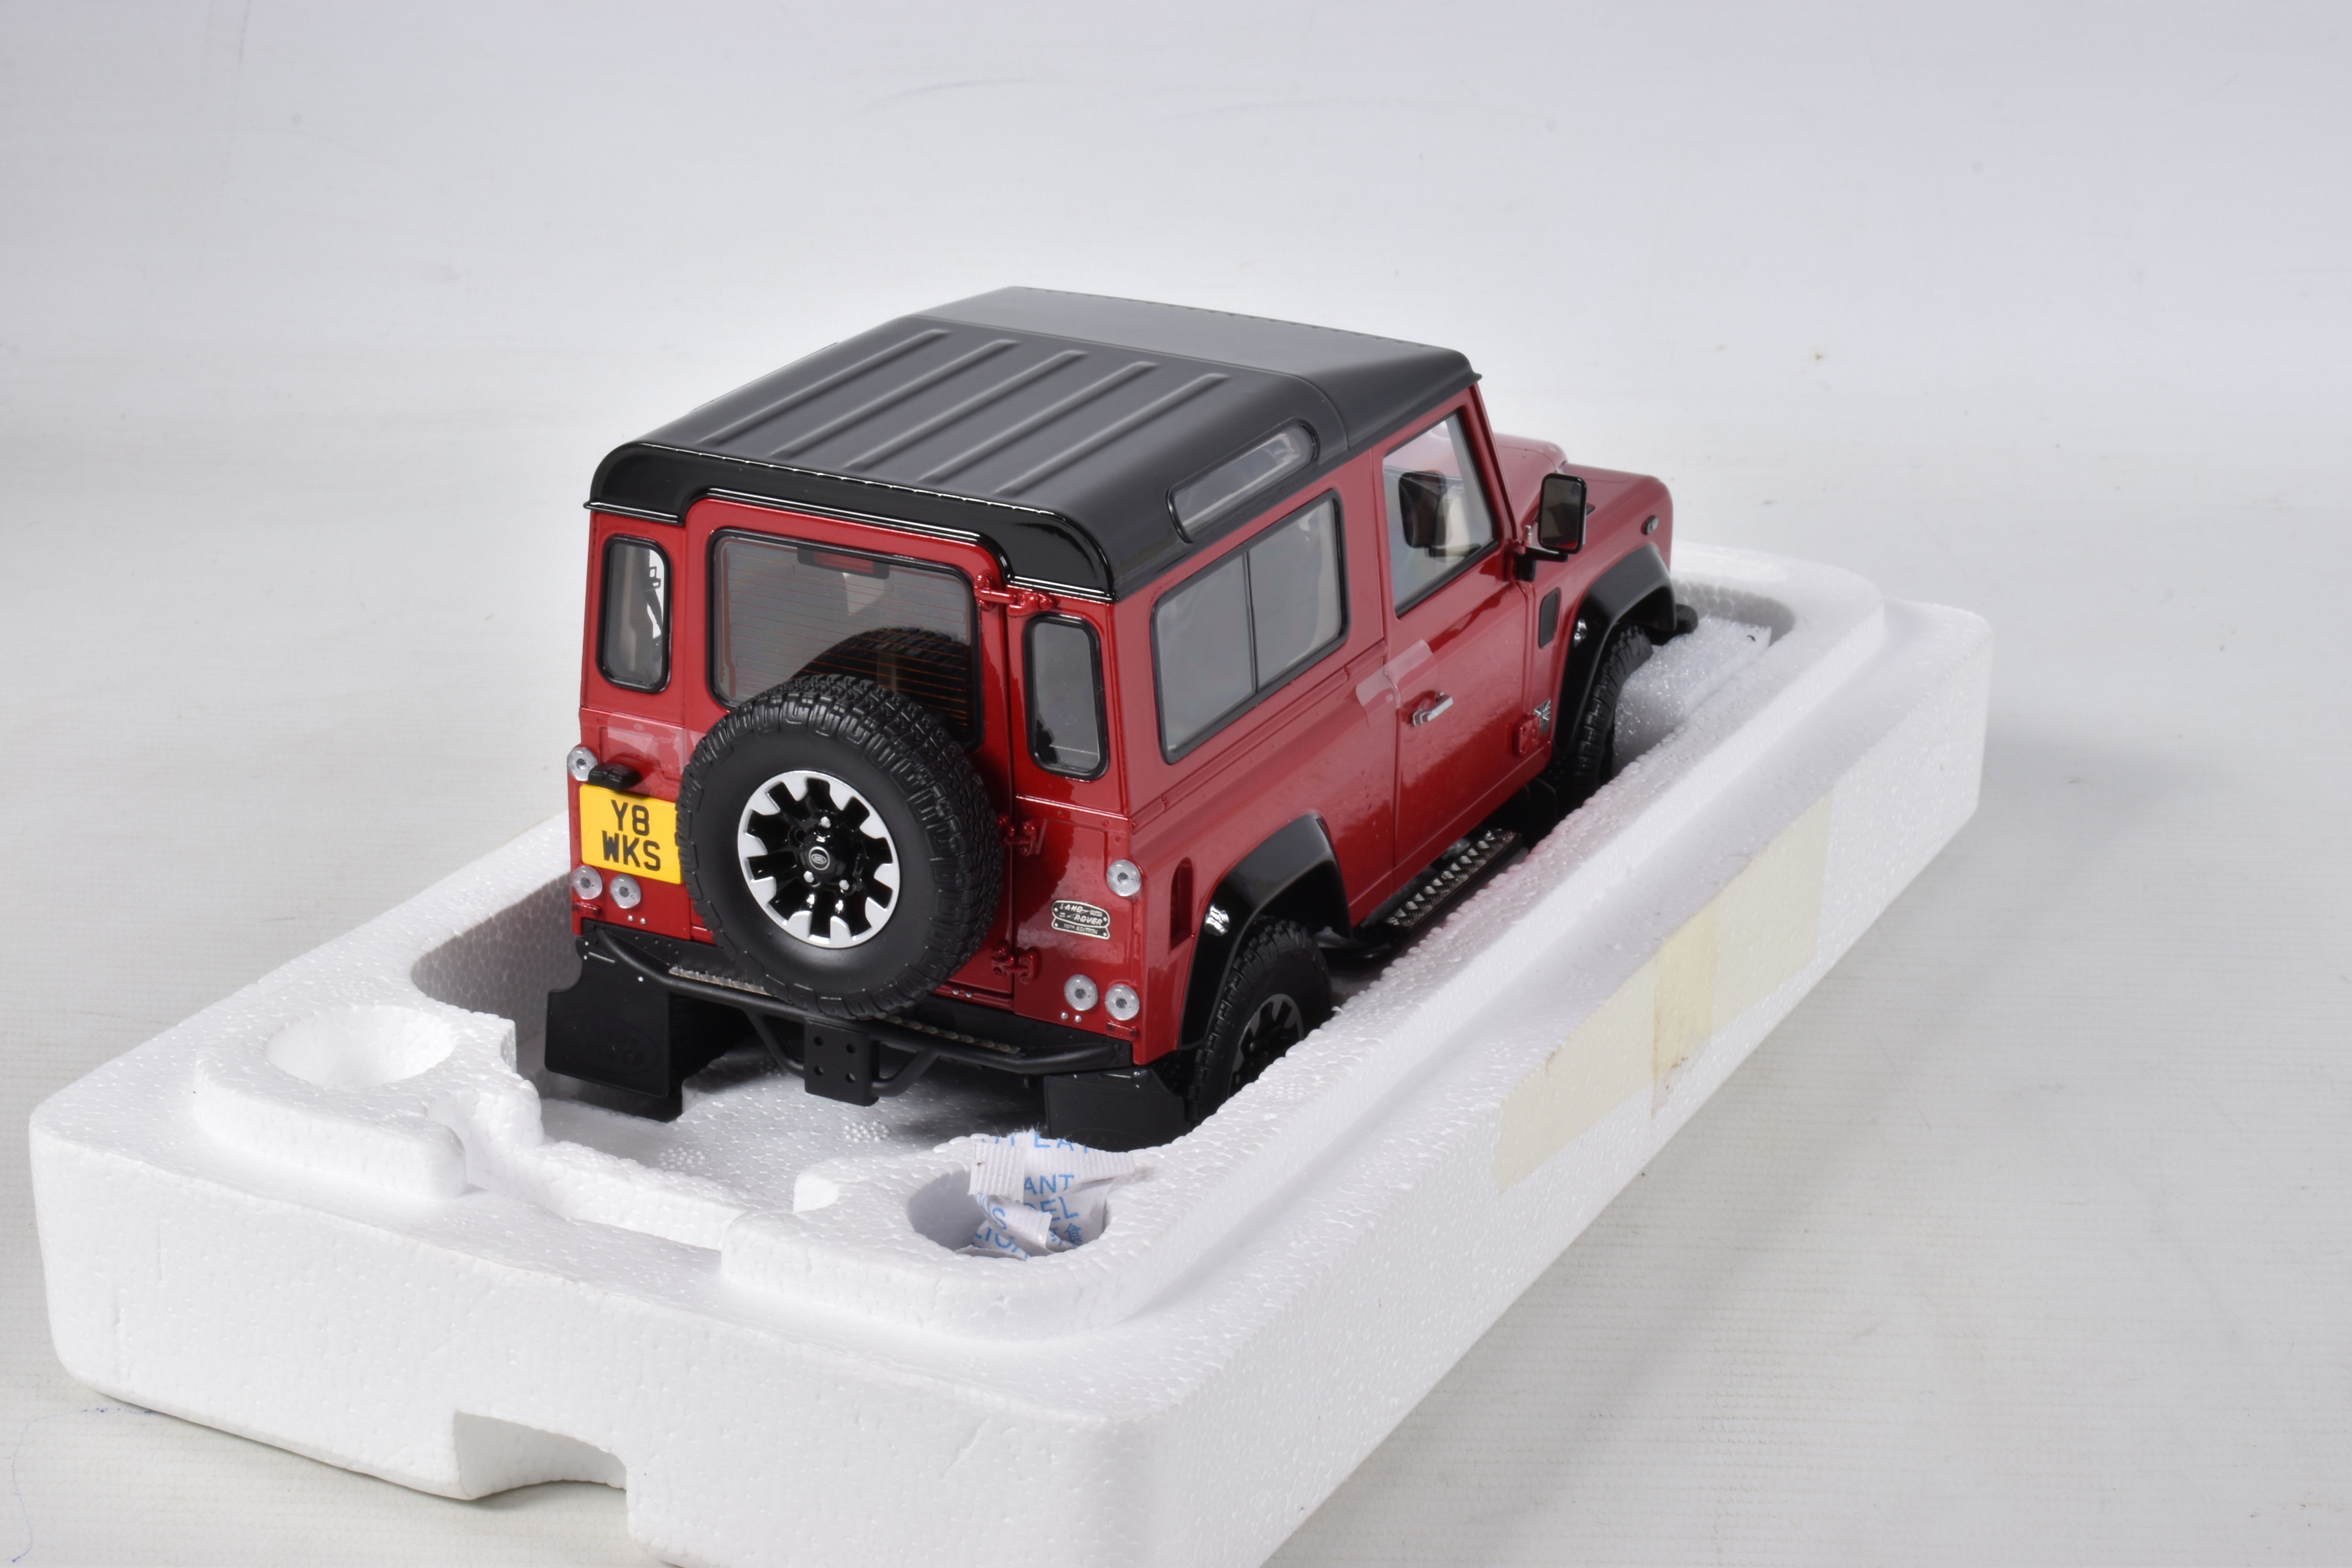 A BOXED ALMOST REAL LAND ROVER DEFENDER 90 SCALE 1:18 MODEL VEHICLE, numbered 810215, painted red - Image 5 of 9